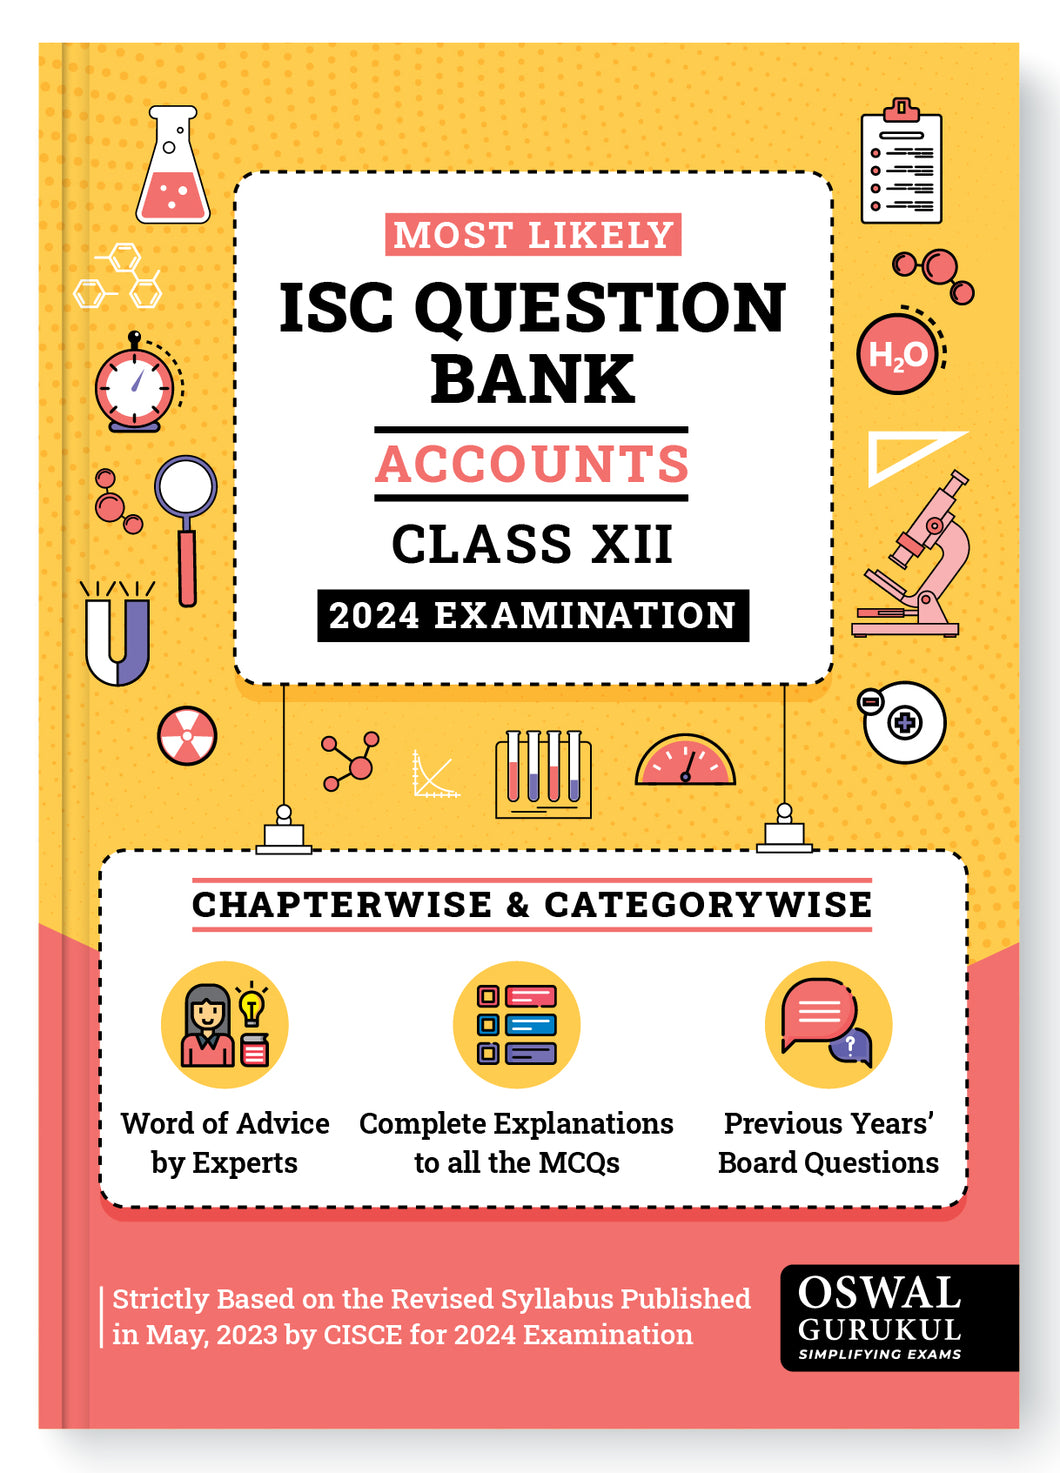 Oswal - Gurukul Accounts Most Likely Question Bank : ISC Class 12 for 2024 Exam